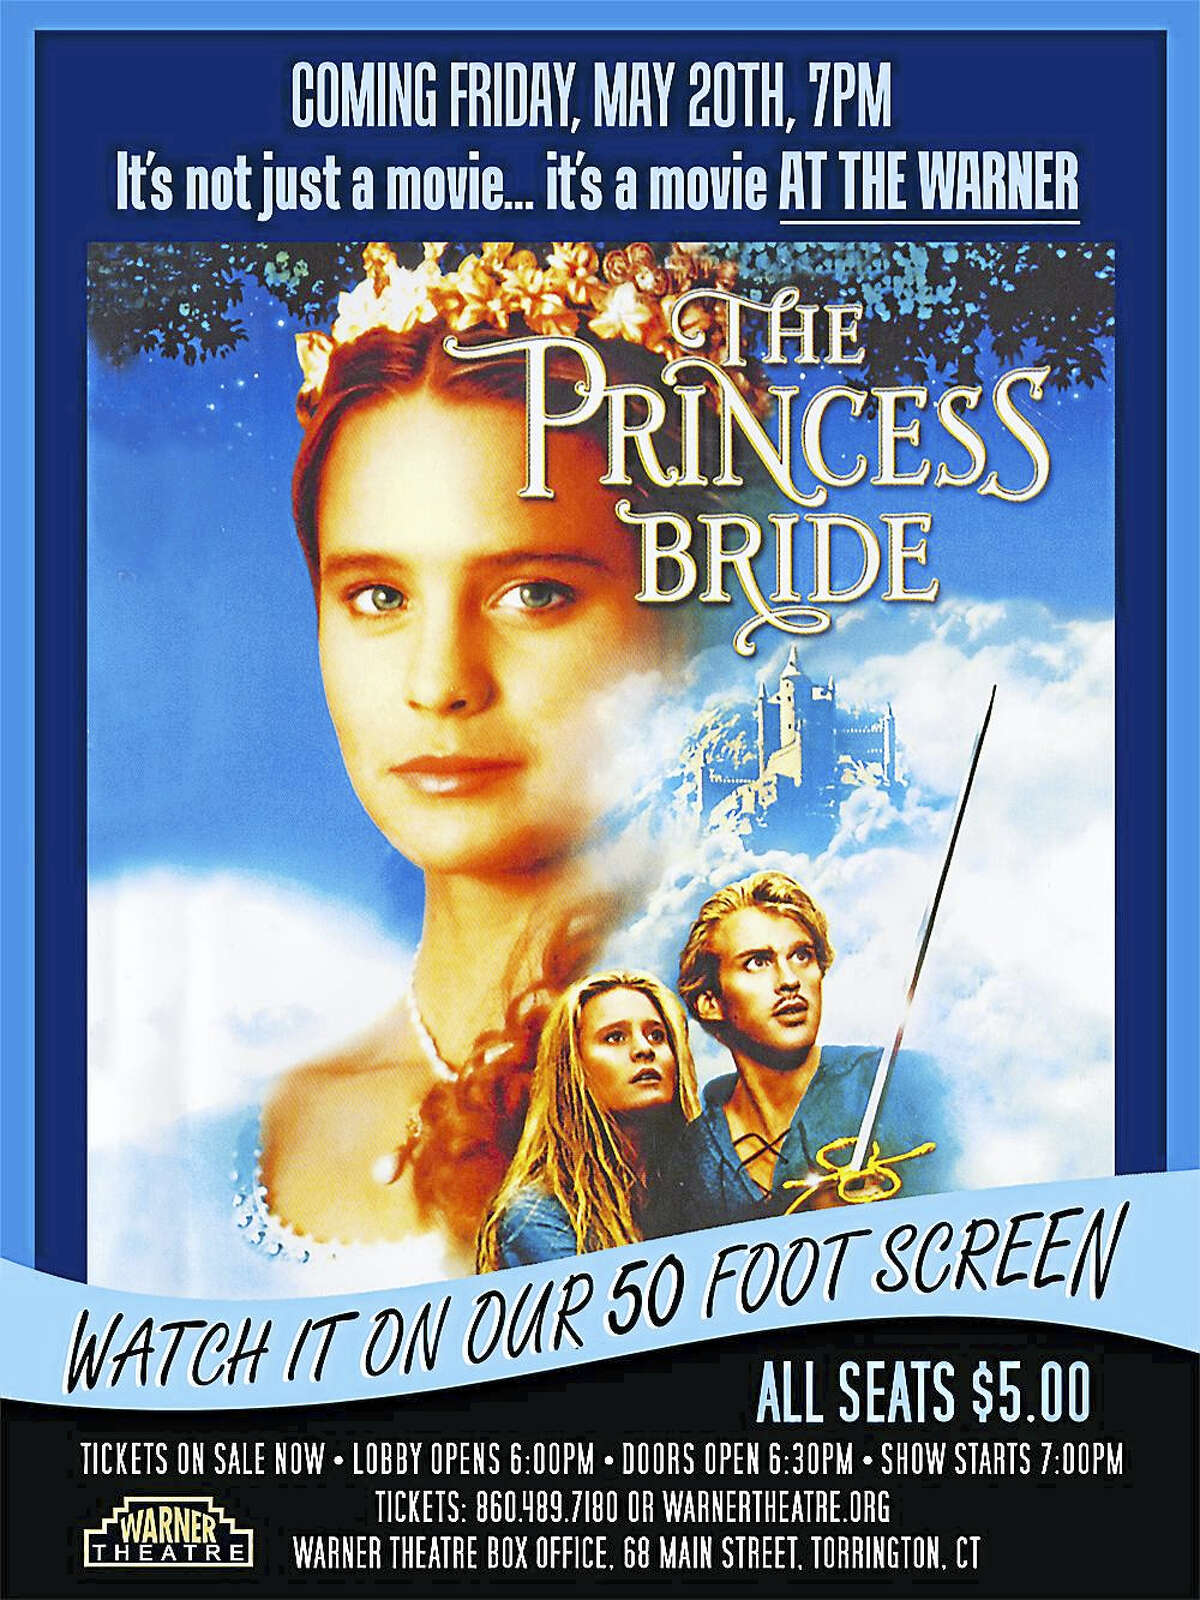 Contributed photoThe Warner Theatre will show The Princess Bride on its 50-foot screen in the main theater in May.